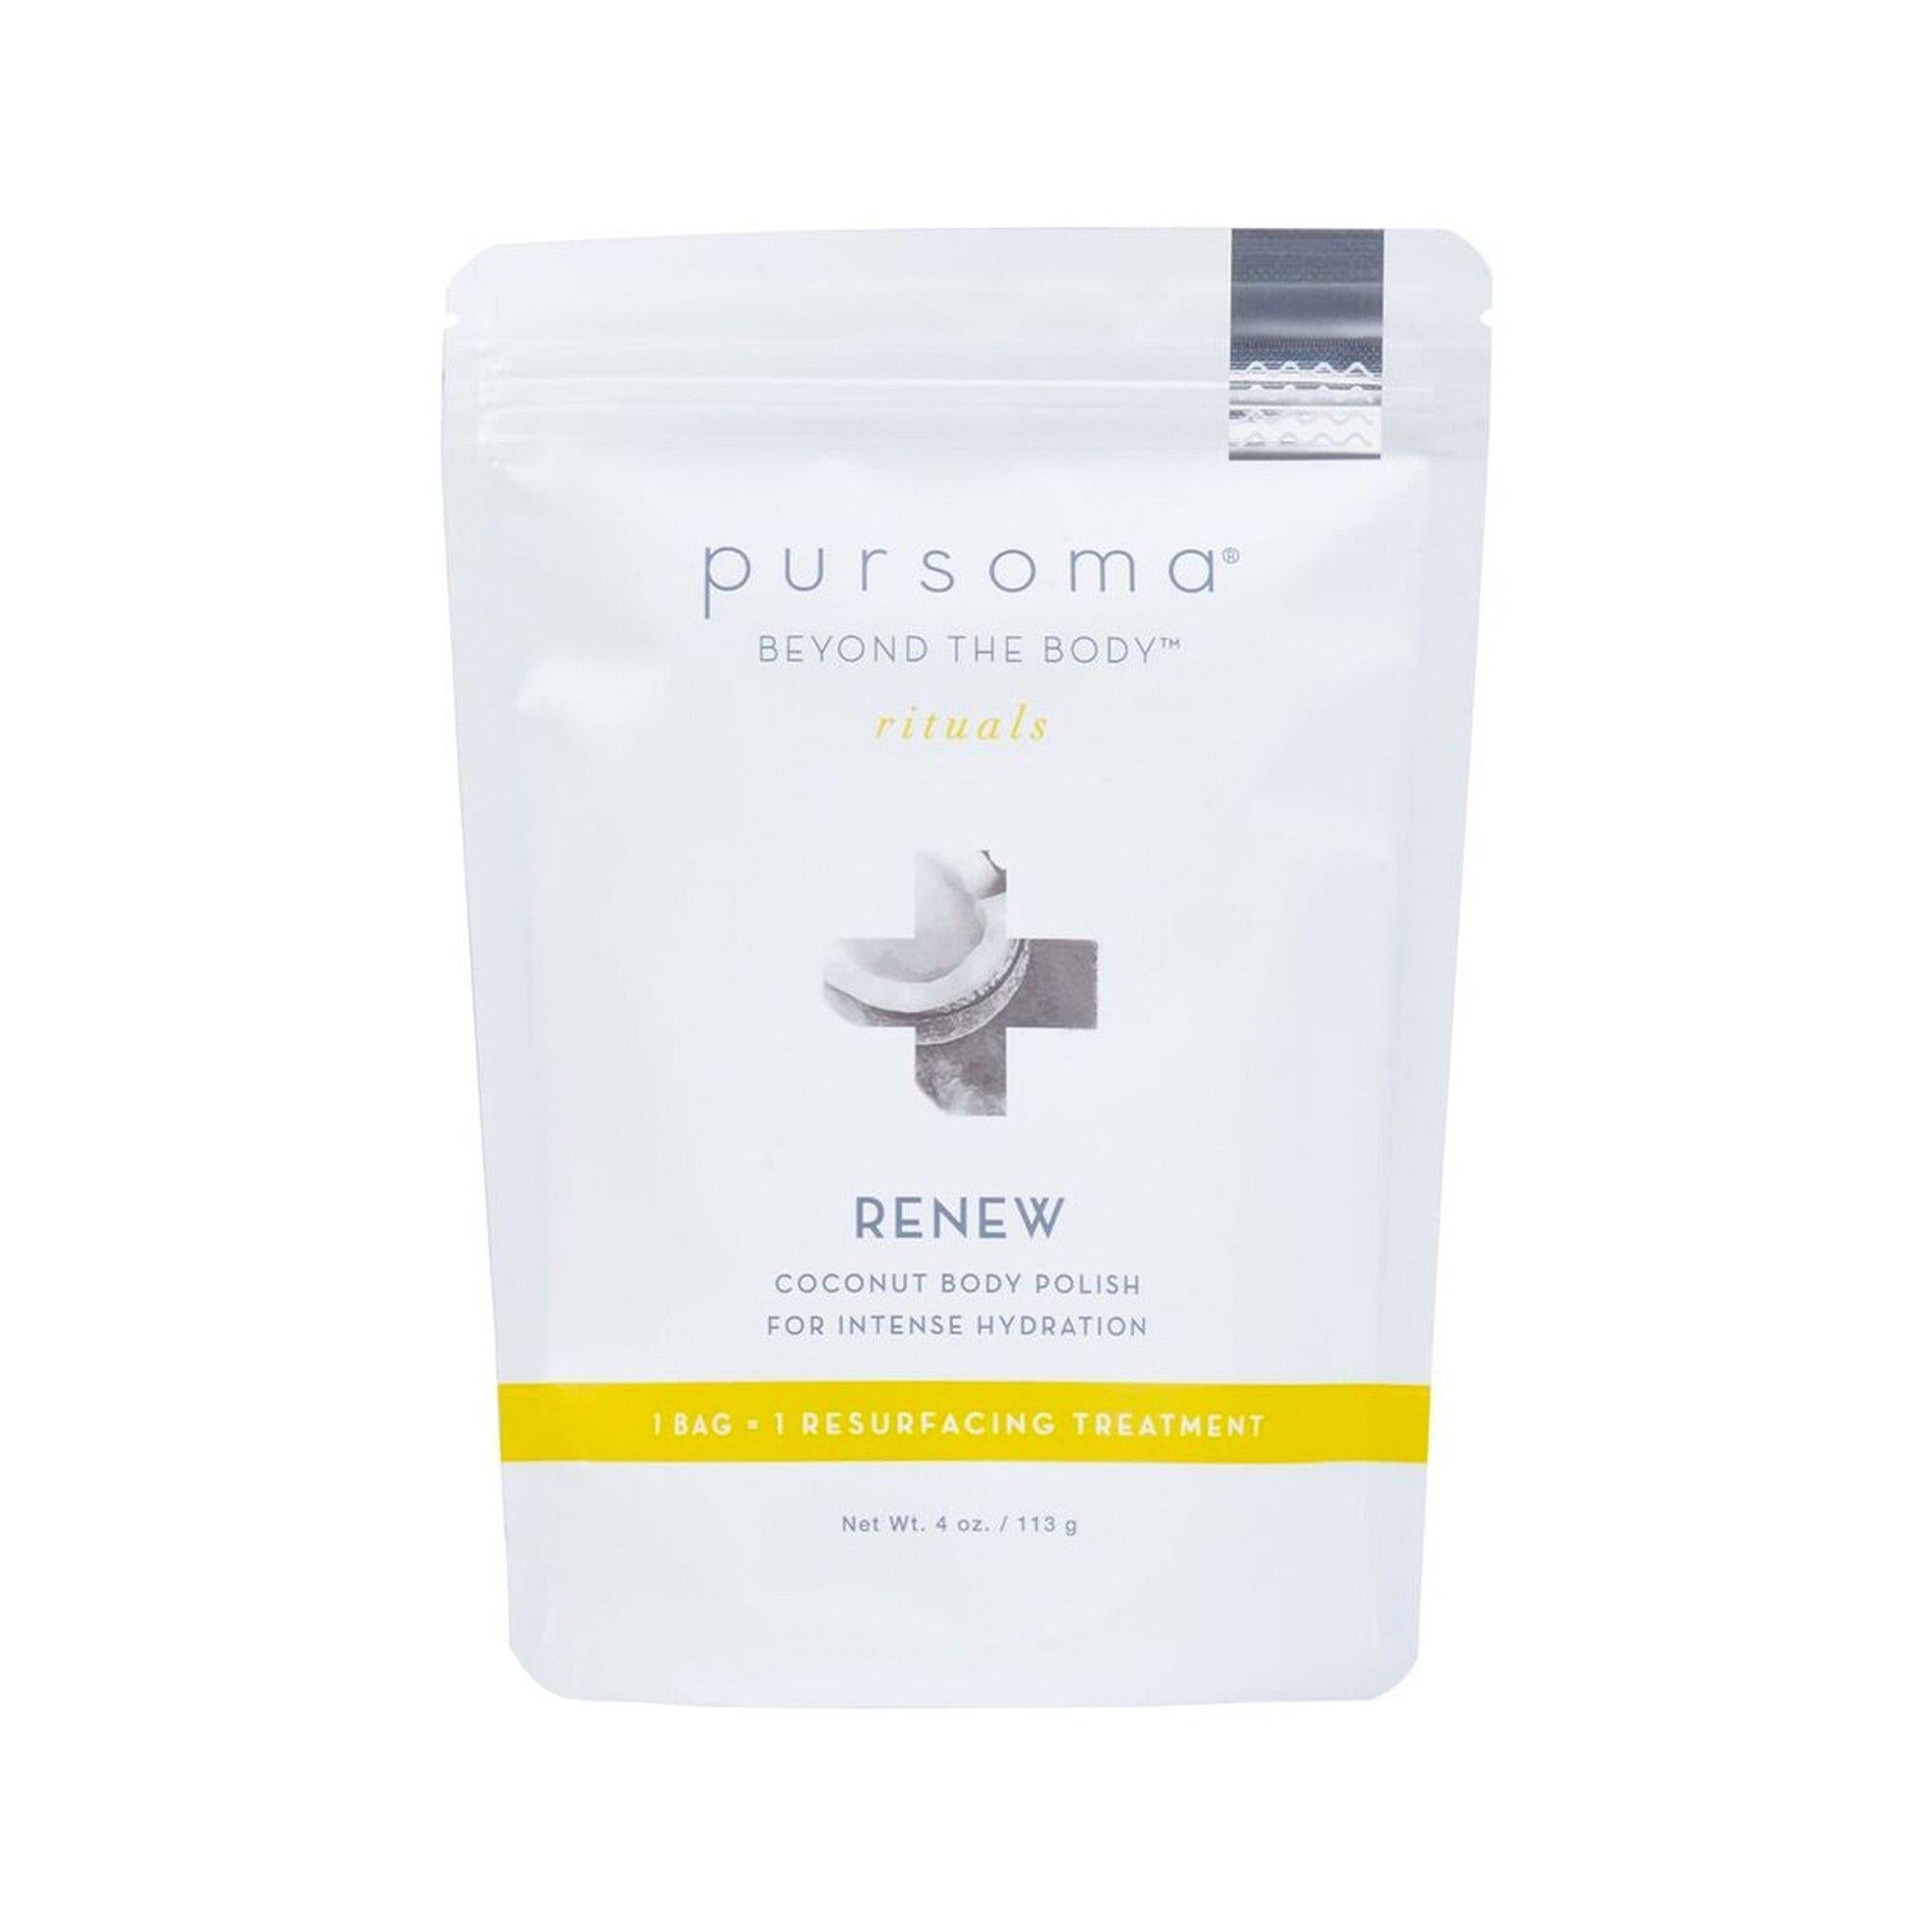 Indisponible : Gommage "Renew" Not available: "Renew" scrub - Pursoma